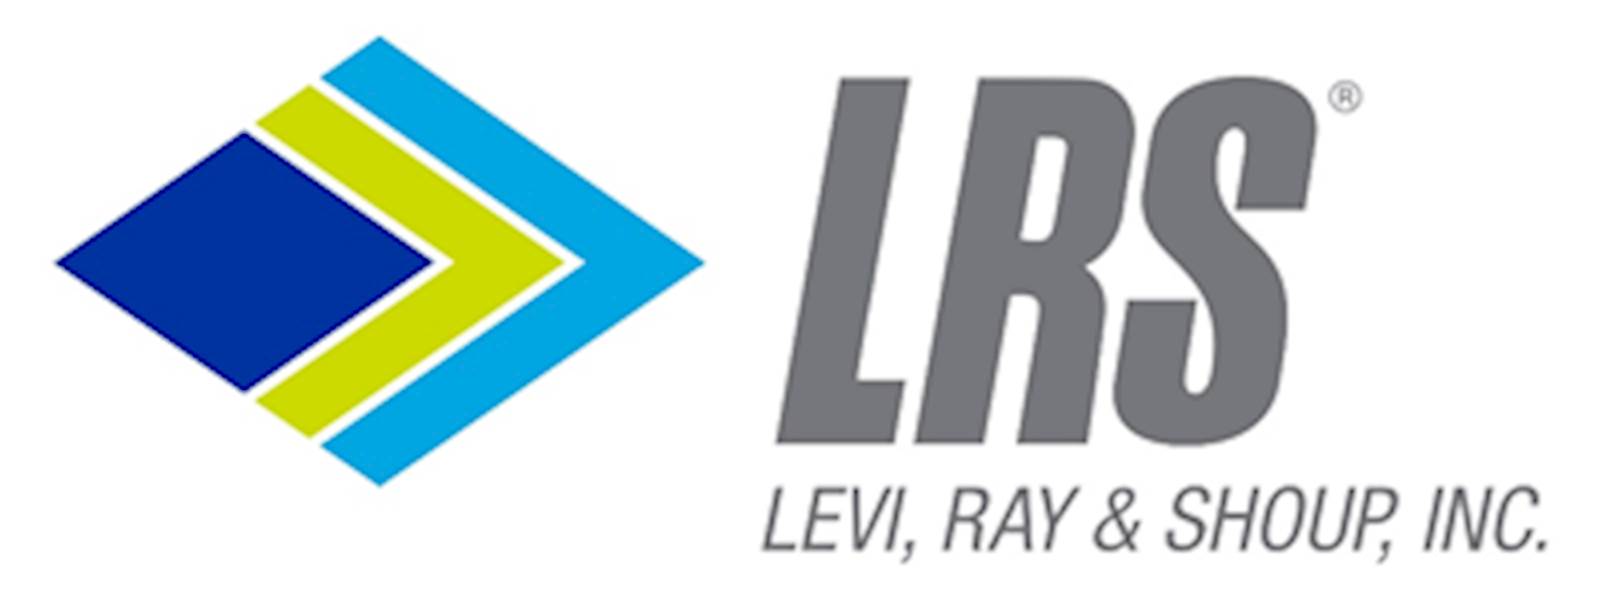 LRS: Levi, Ray & Shoup Inc. on white background witch colored chevron logo